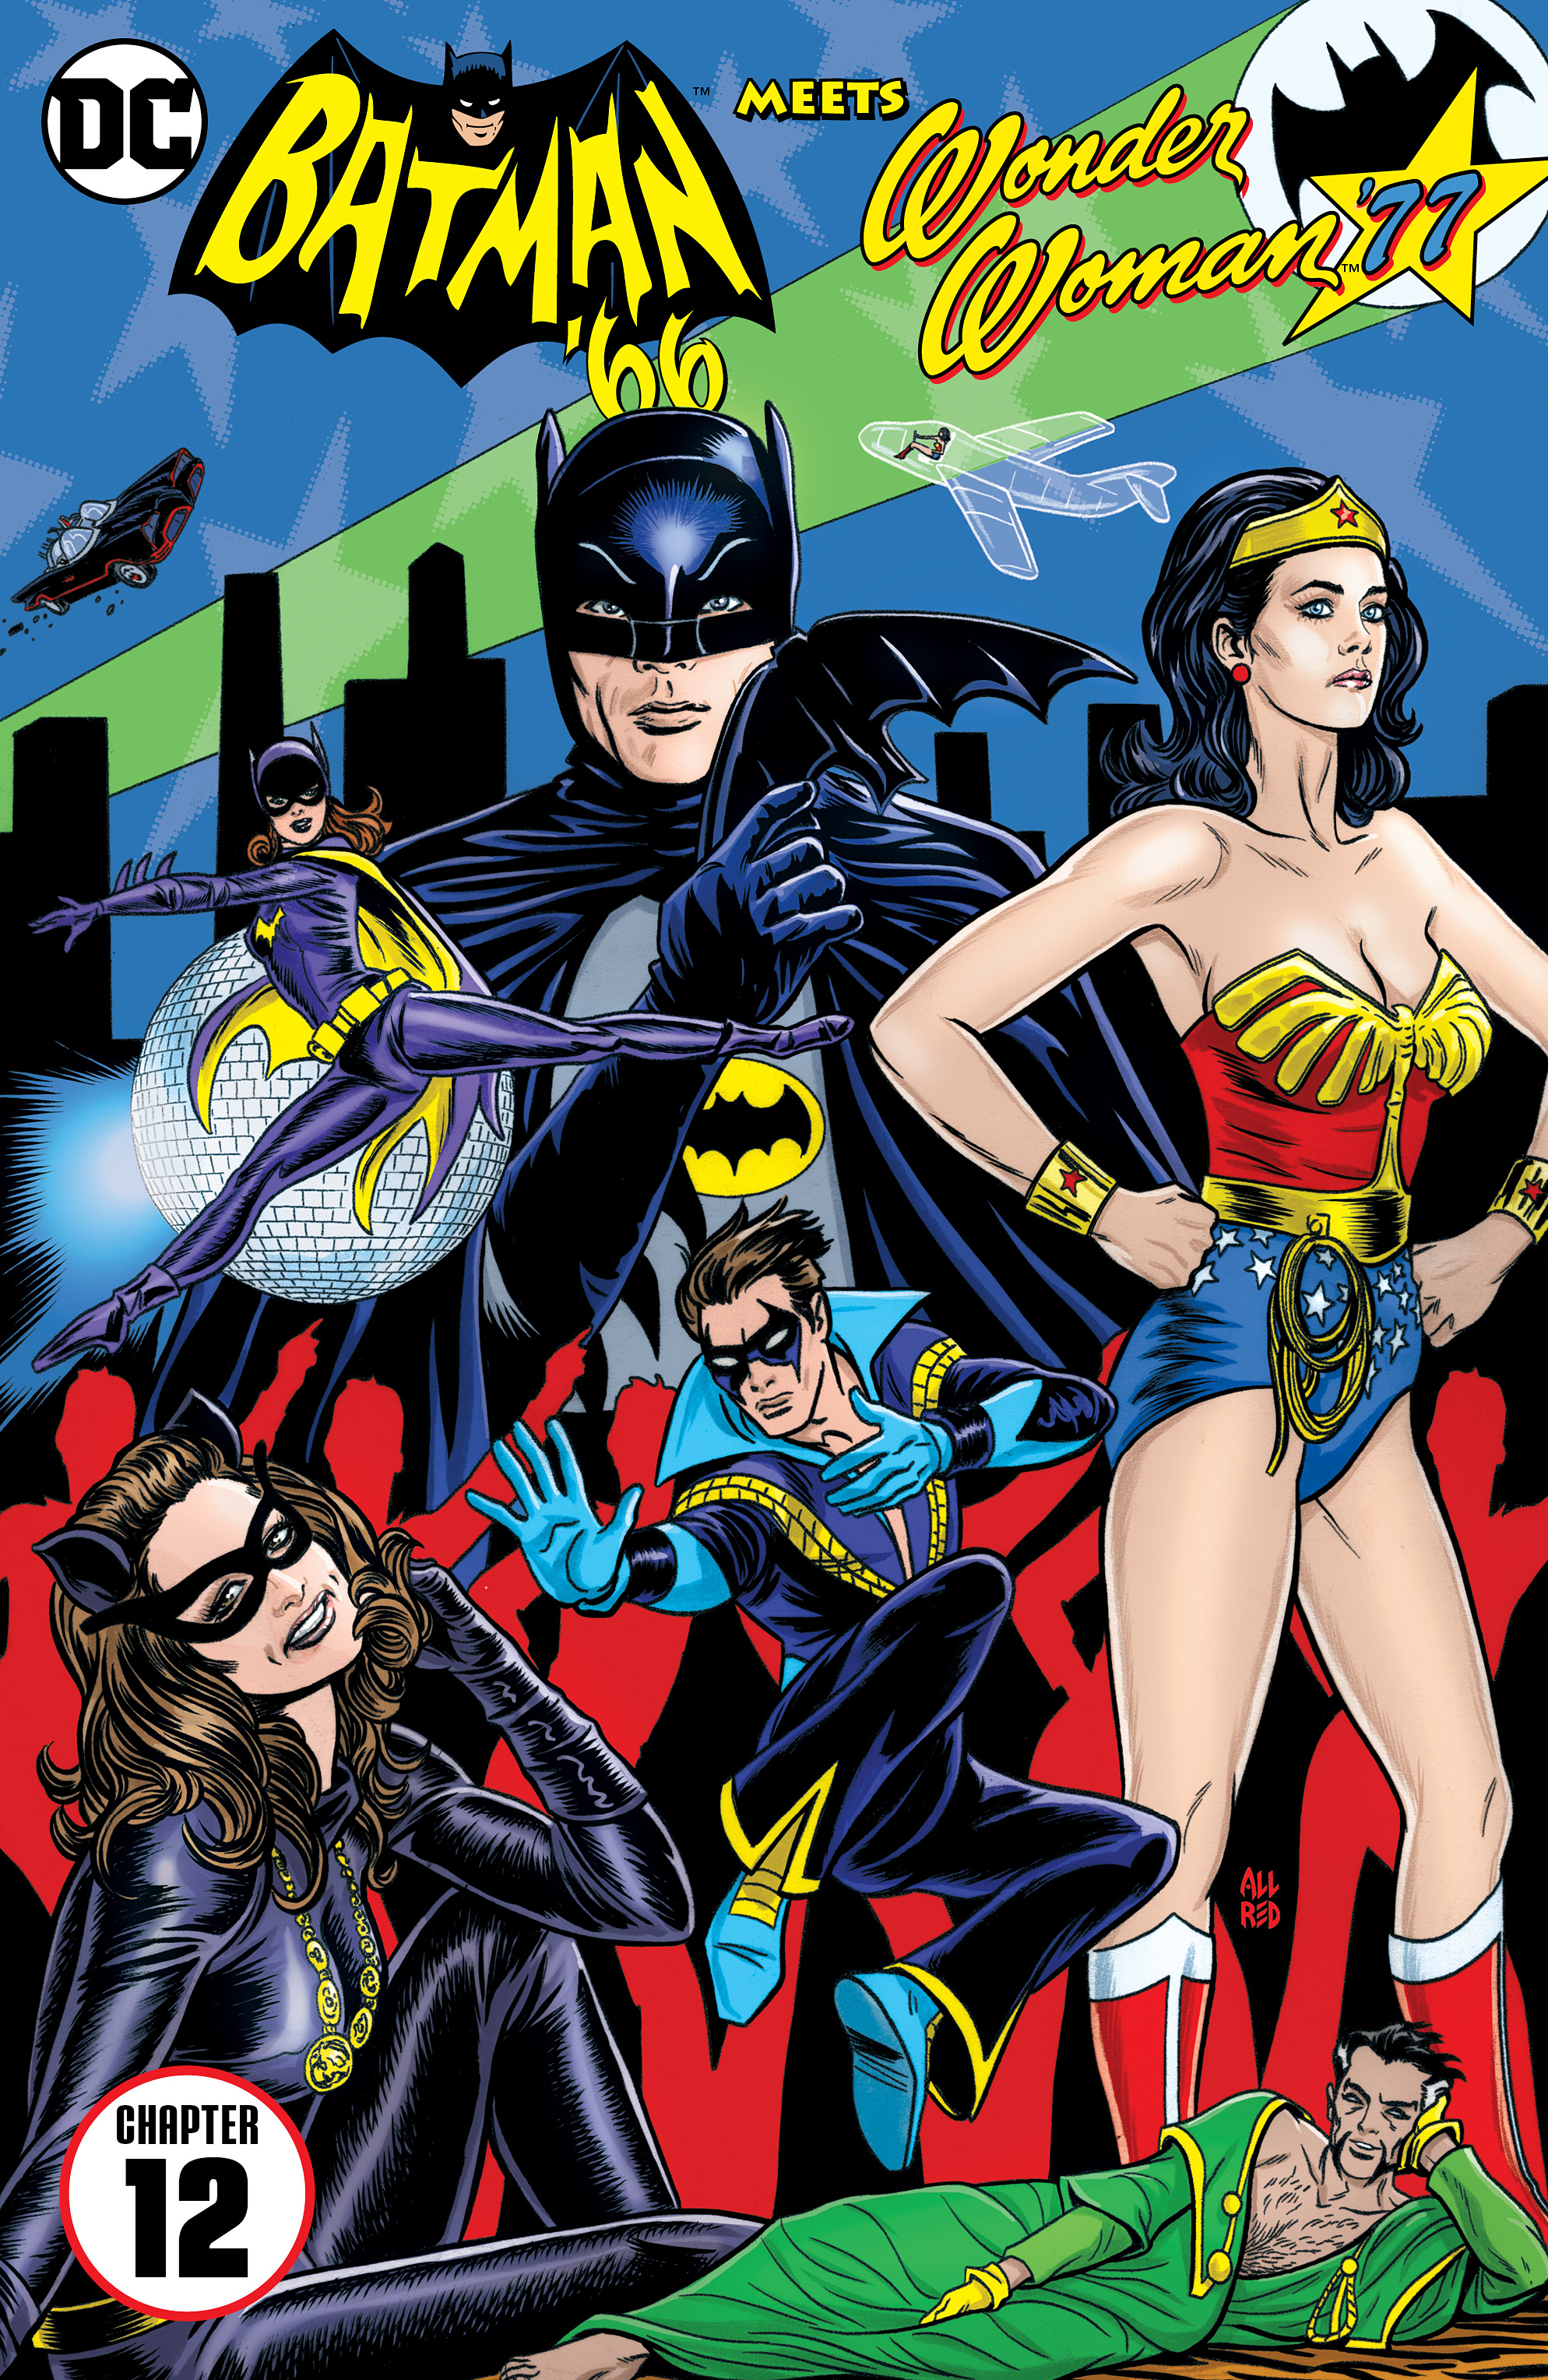 Batman And Wonder Woman And Batgirl Porn - Batman 66 Meets Wonder Woman 77 Issue 12 | Read Batman 66 Meets Wonder Woman  77 Issue 12 comic online in high quality. Read Full Comic online for free -  Read comics online in high quality .| READ COMIC ONLINE